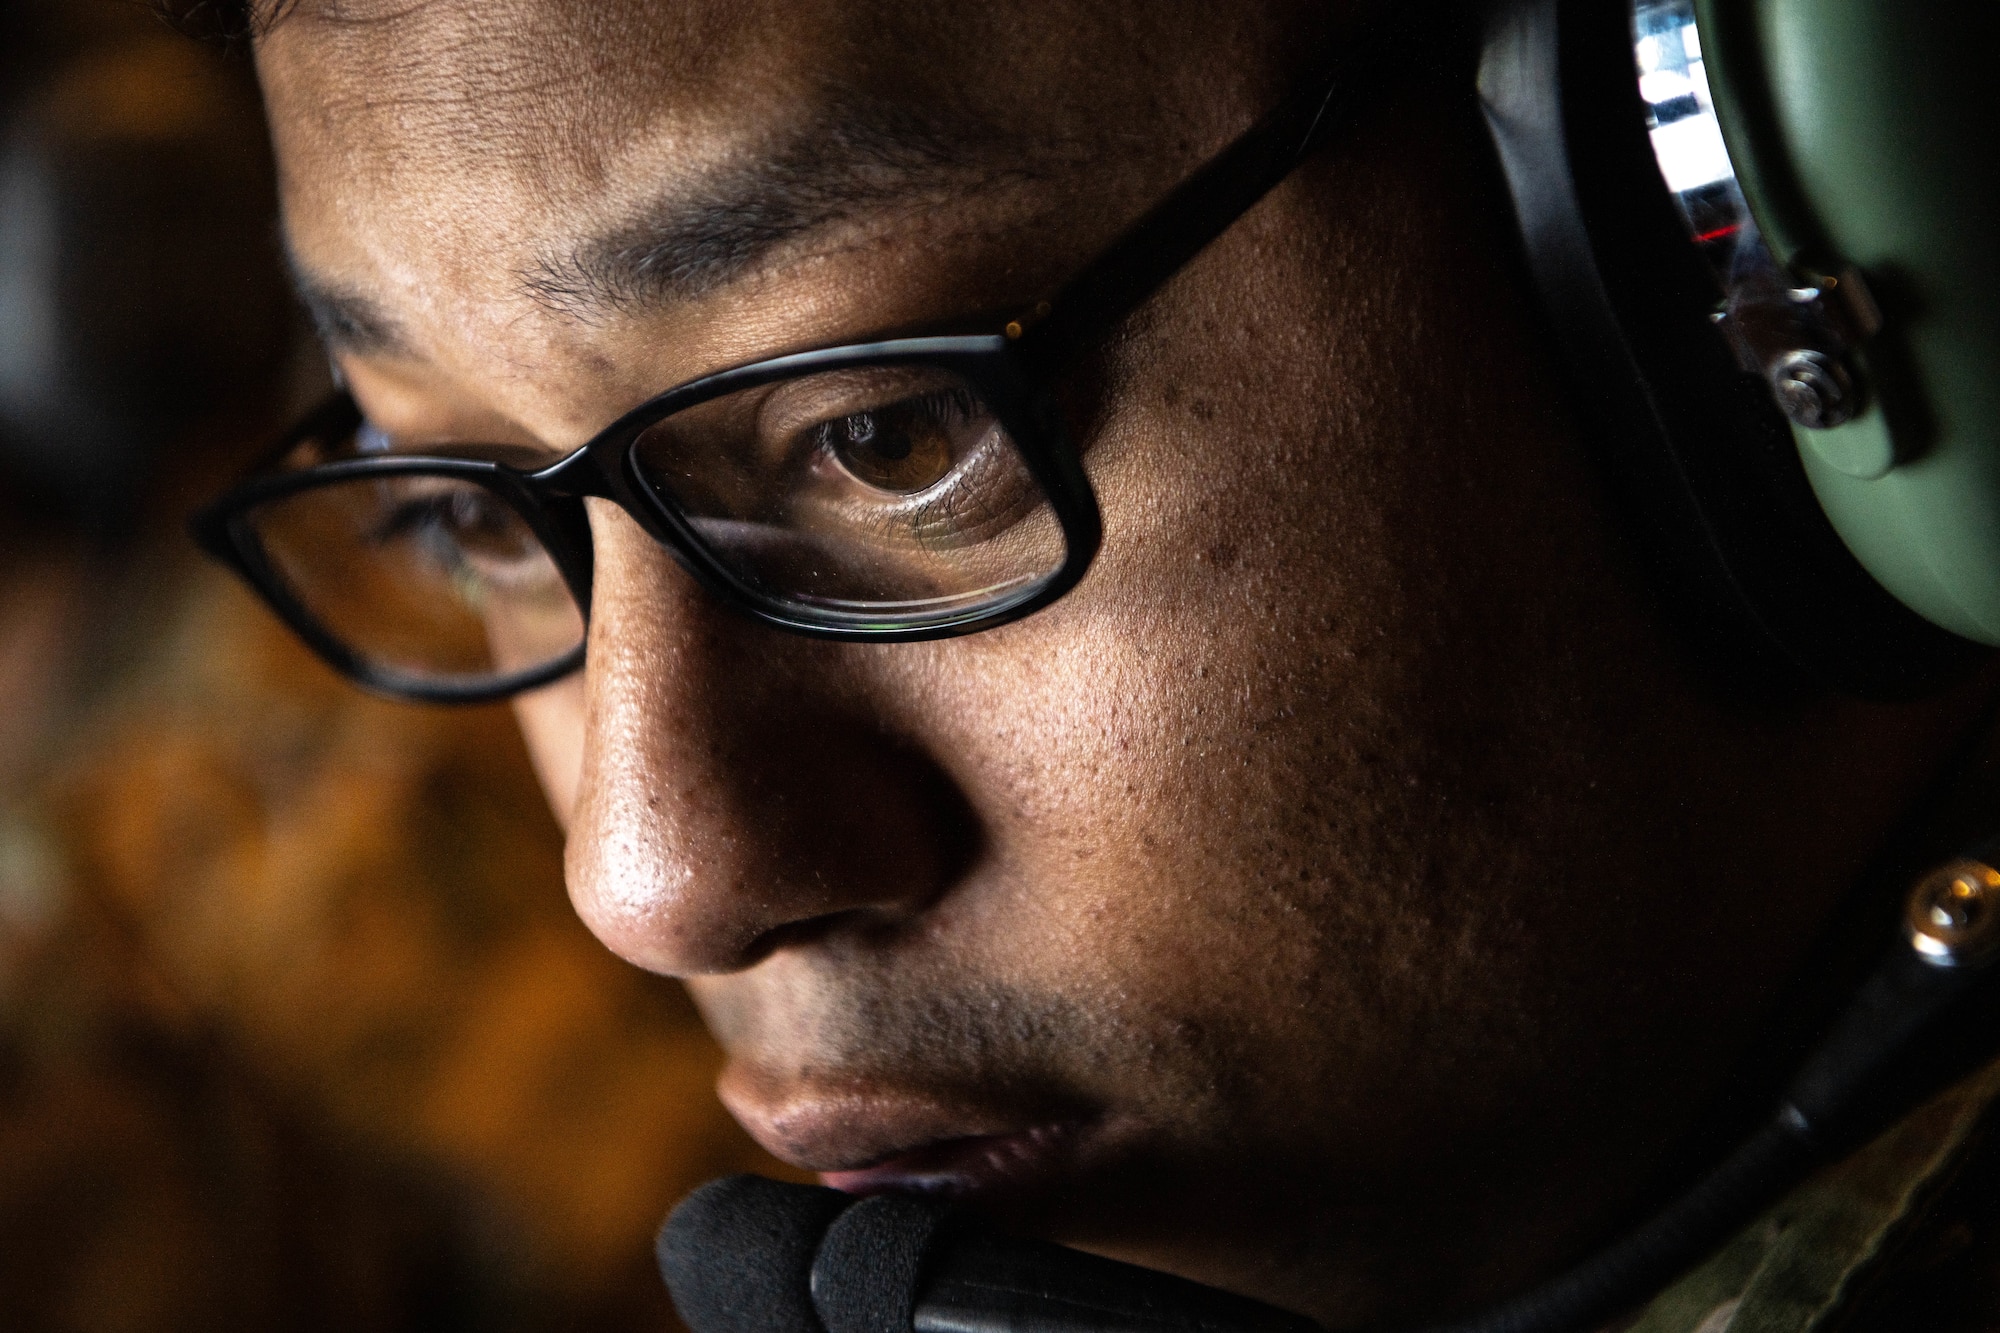 a very close image of a man wearing glasses and headphones